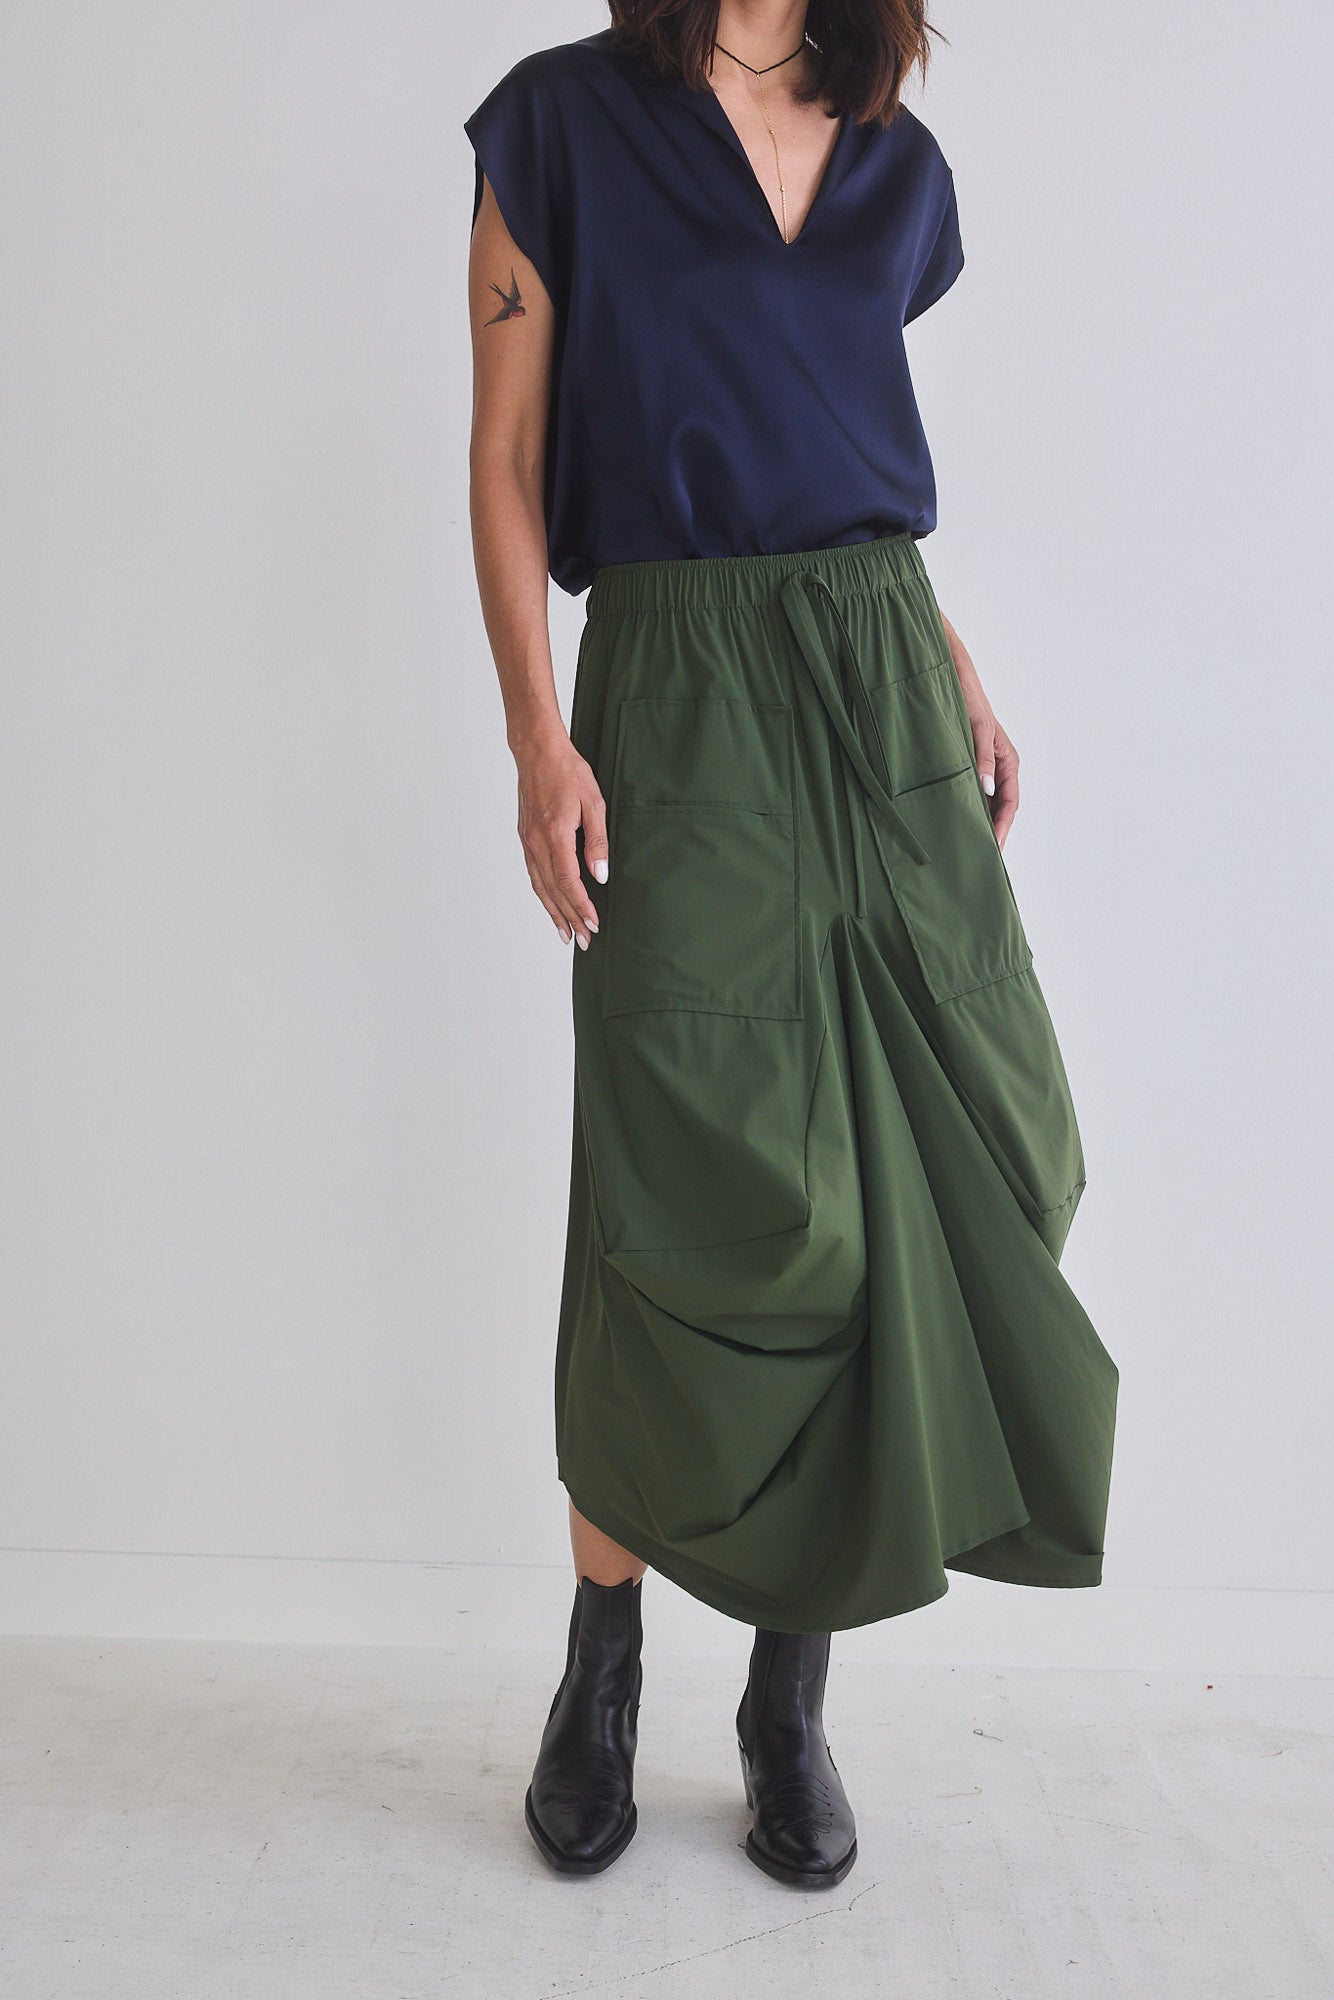 The Go-To Skirt